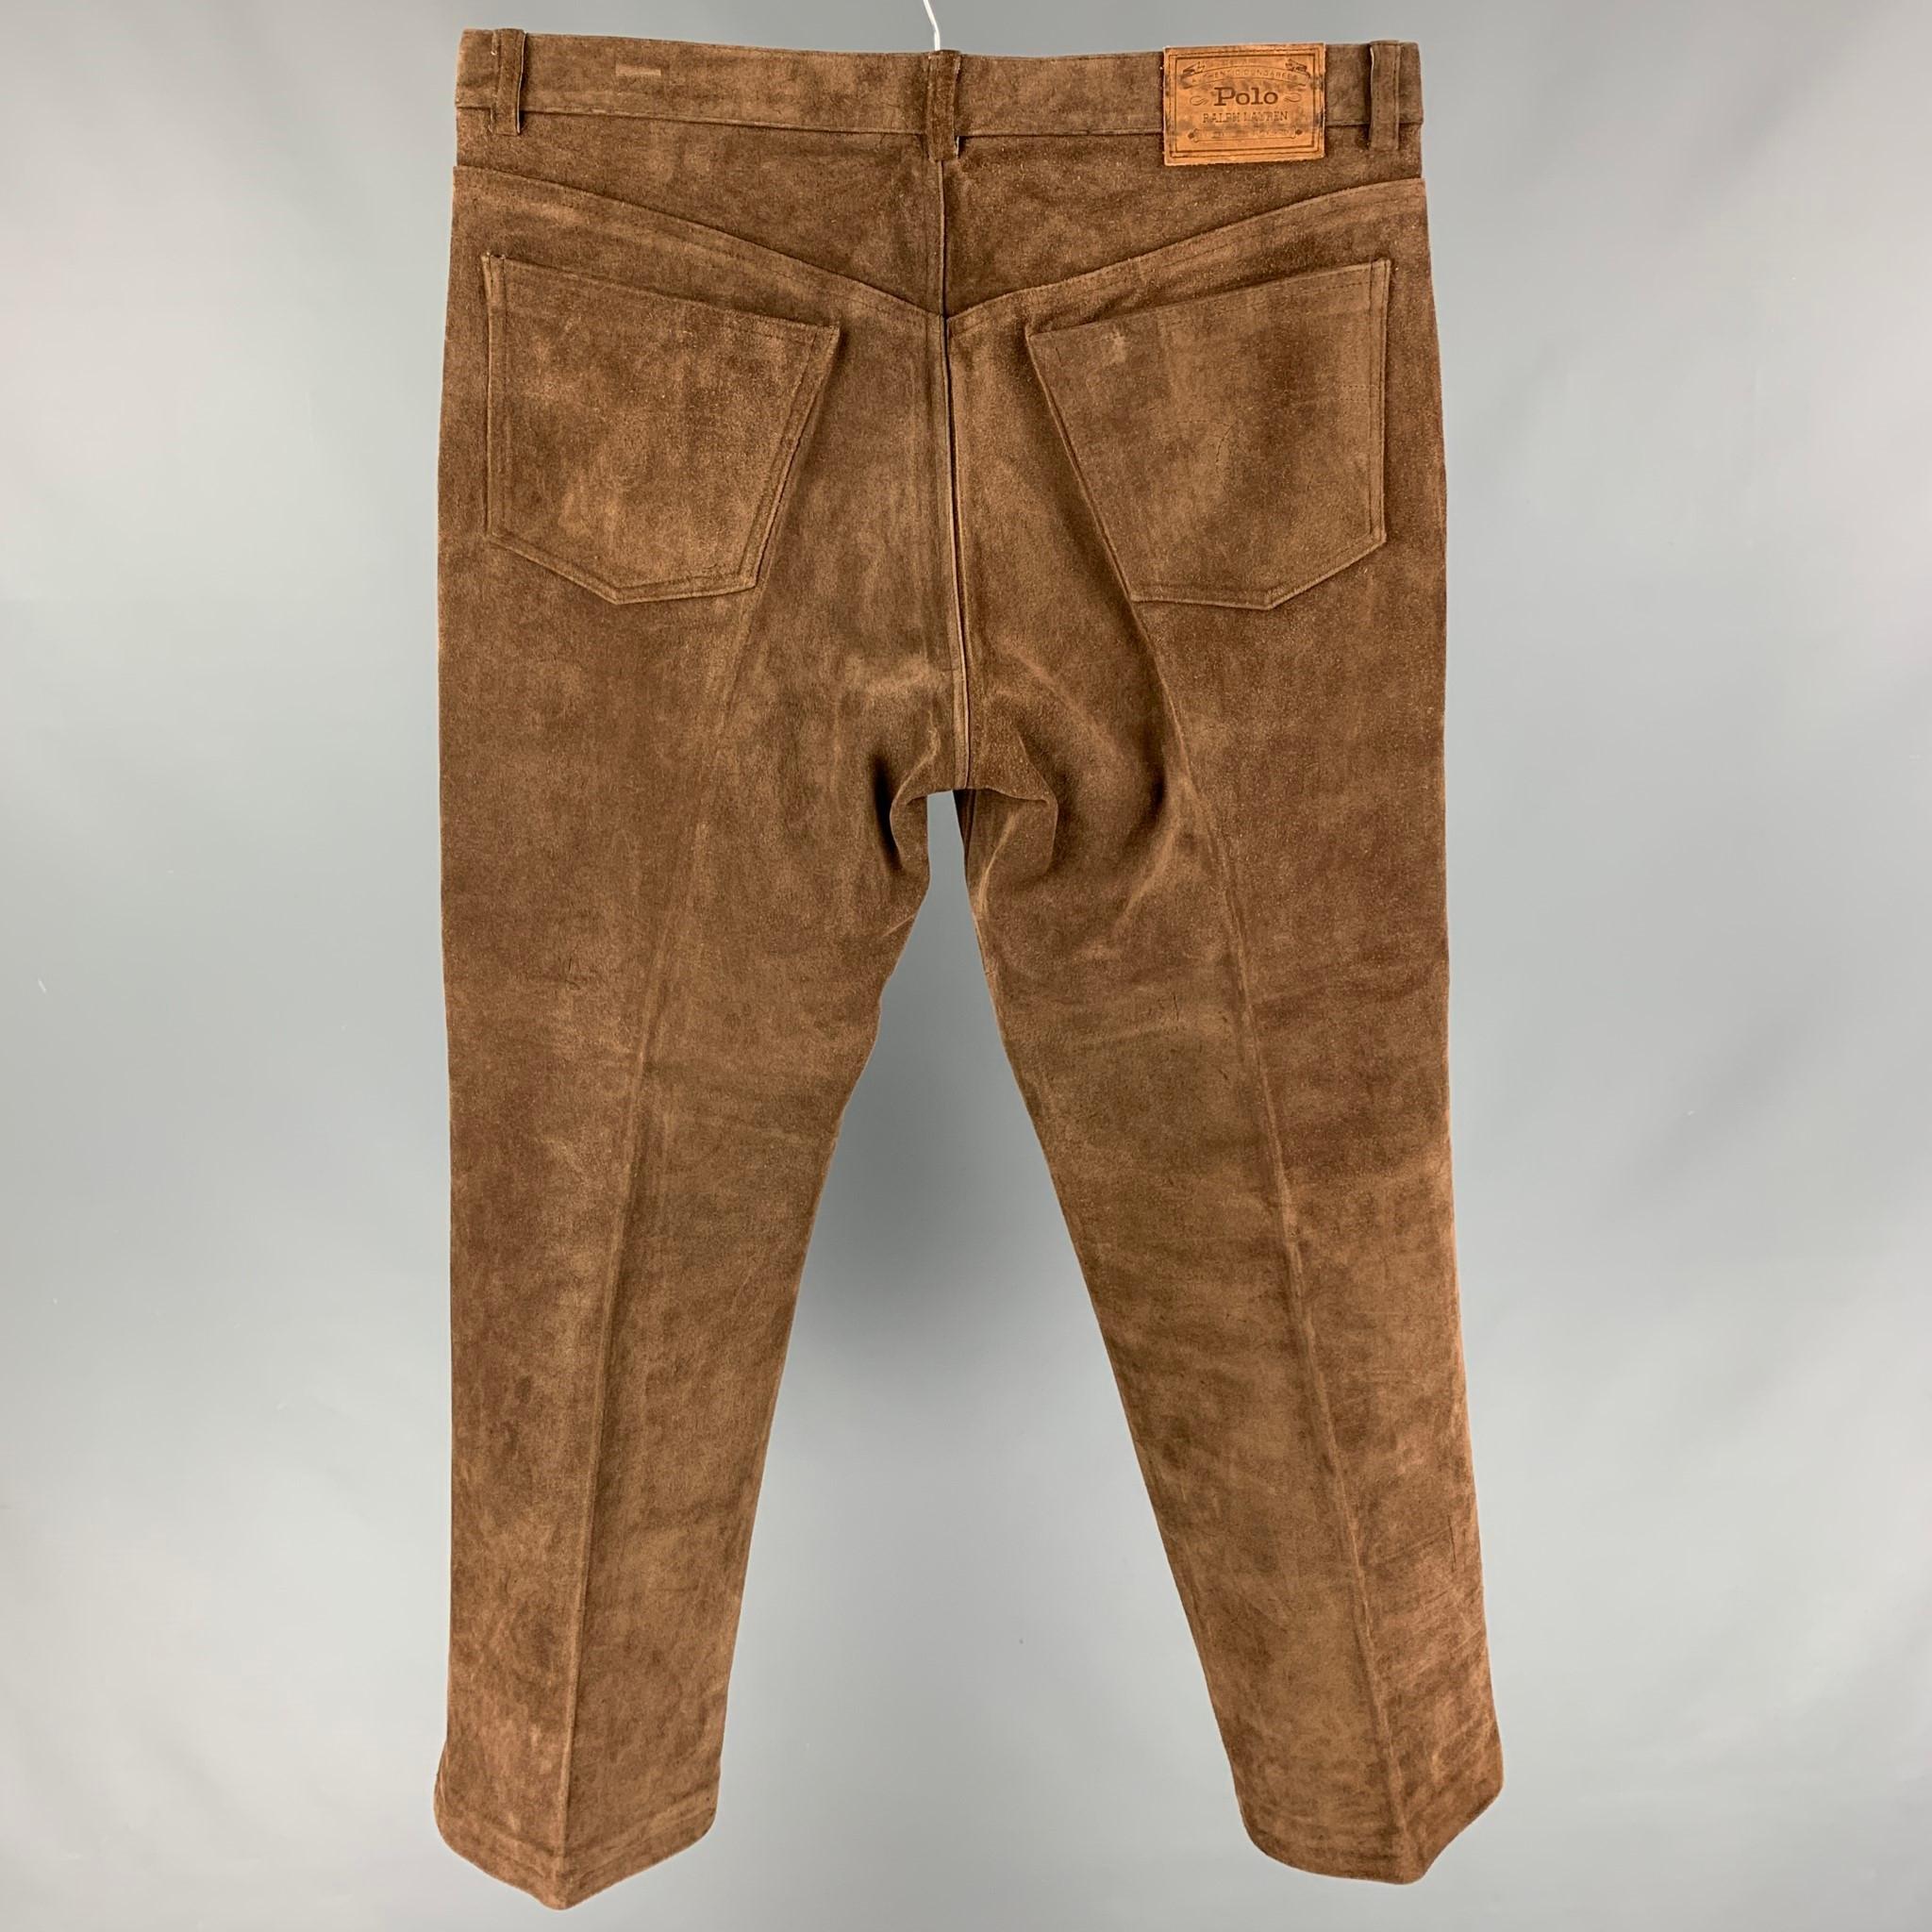 POLO by RALPH LAUREN pants comes in a brown suede featuring a straight leg and a zip fly closure. 

Good Pre-Owned Condition.
Marked: 38

Measurements:

Waist: 36 in.
Rise: 12 in.
Inseam: 29 in. 